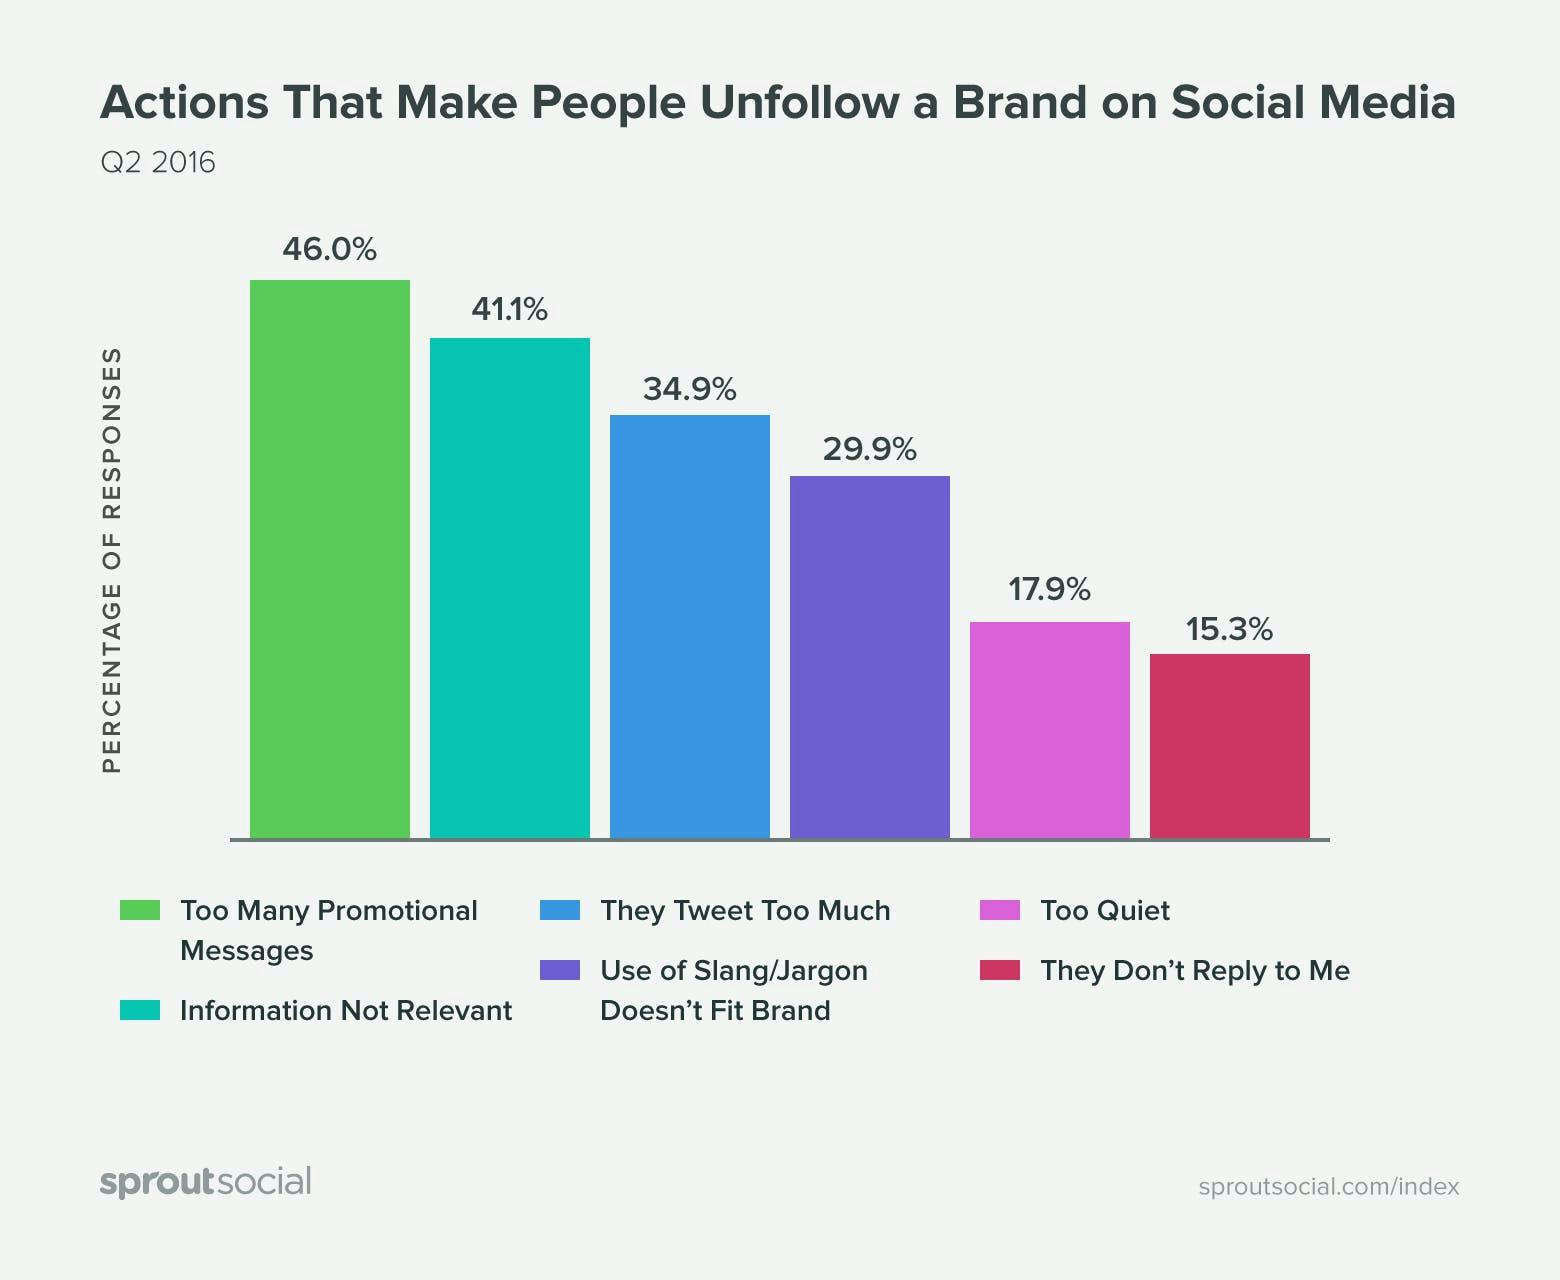 Sprout Social: what makes people unfollow a brand on social media